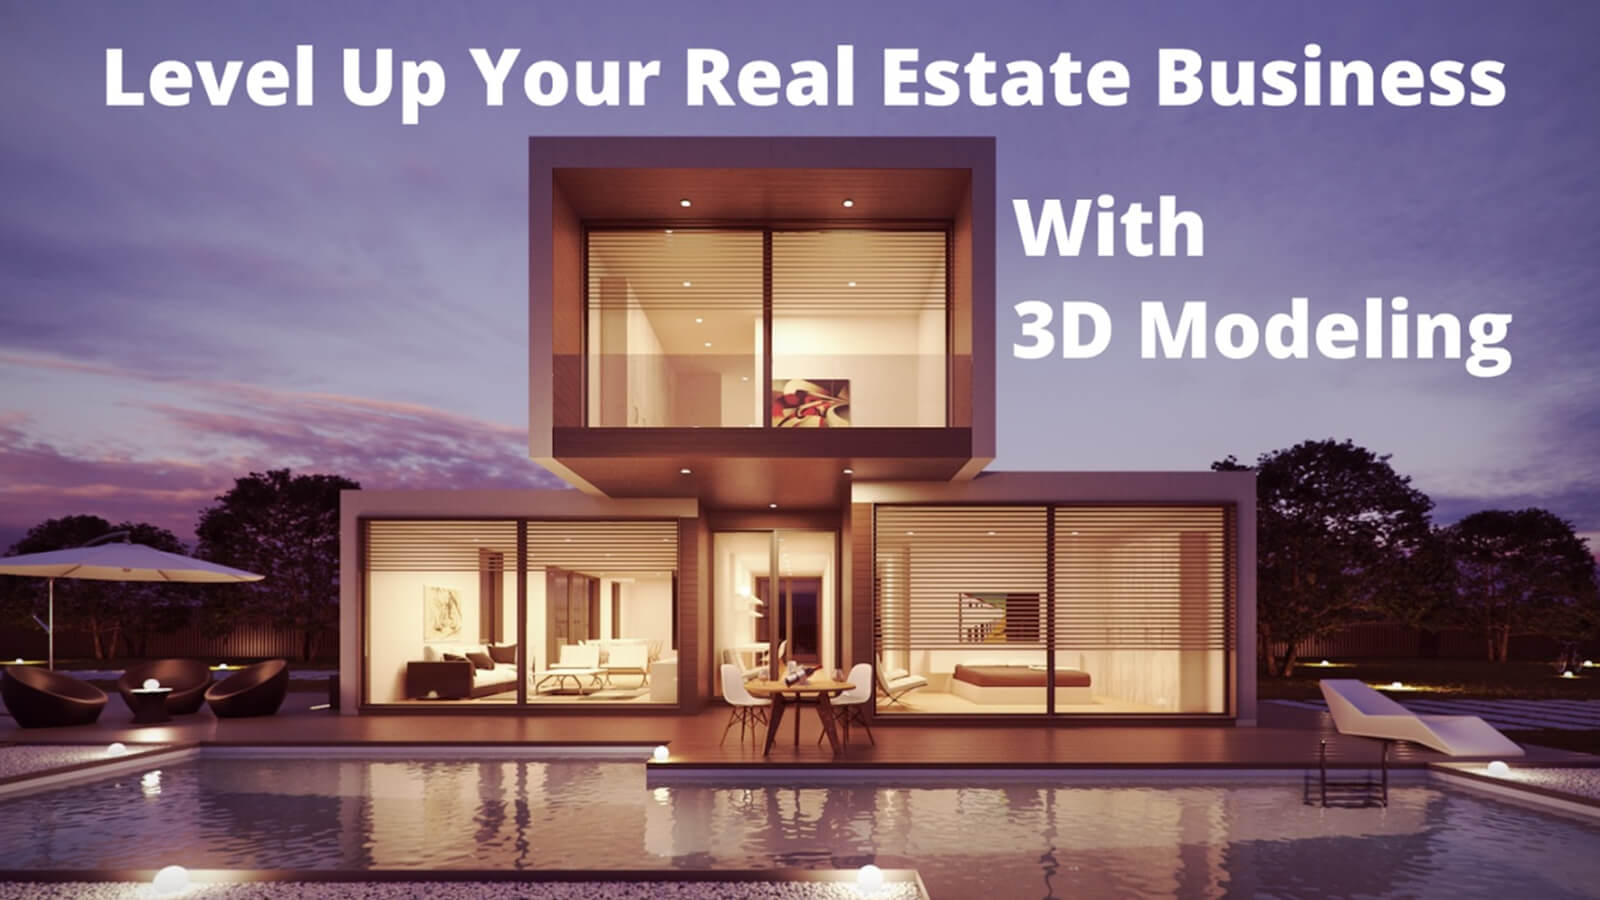 How 3D Modeling can Take your Real Estate Business